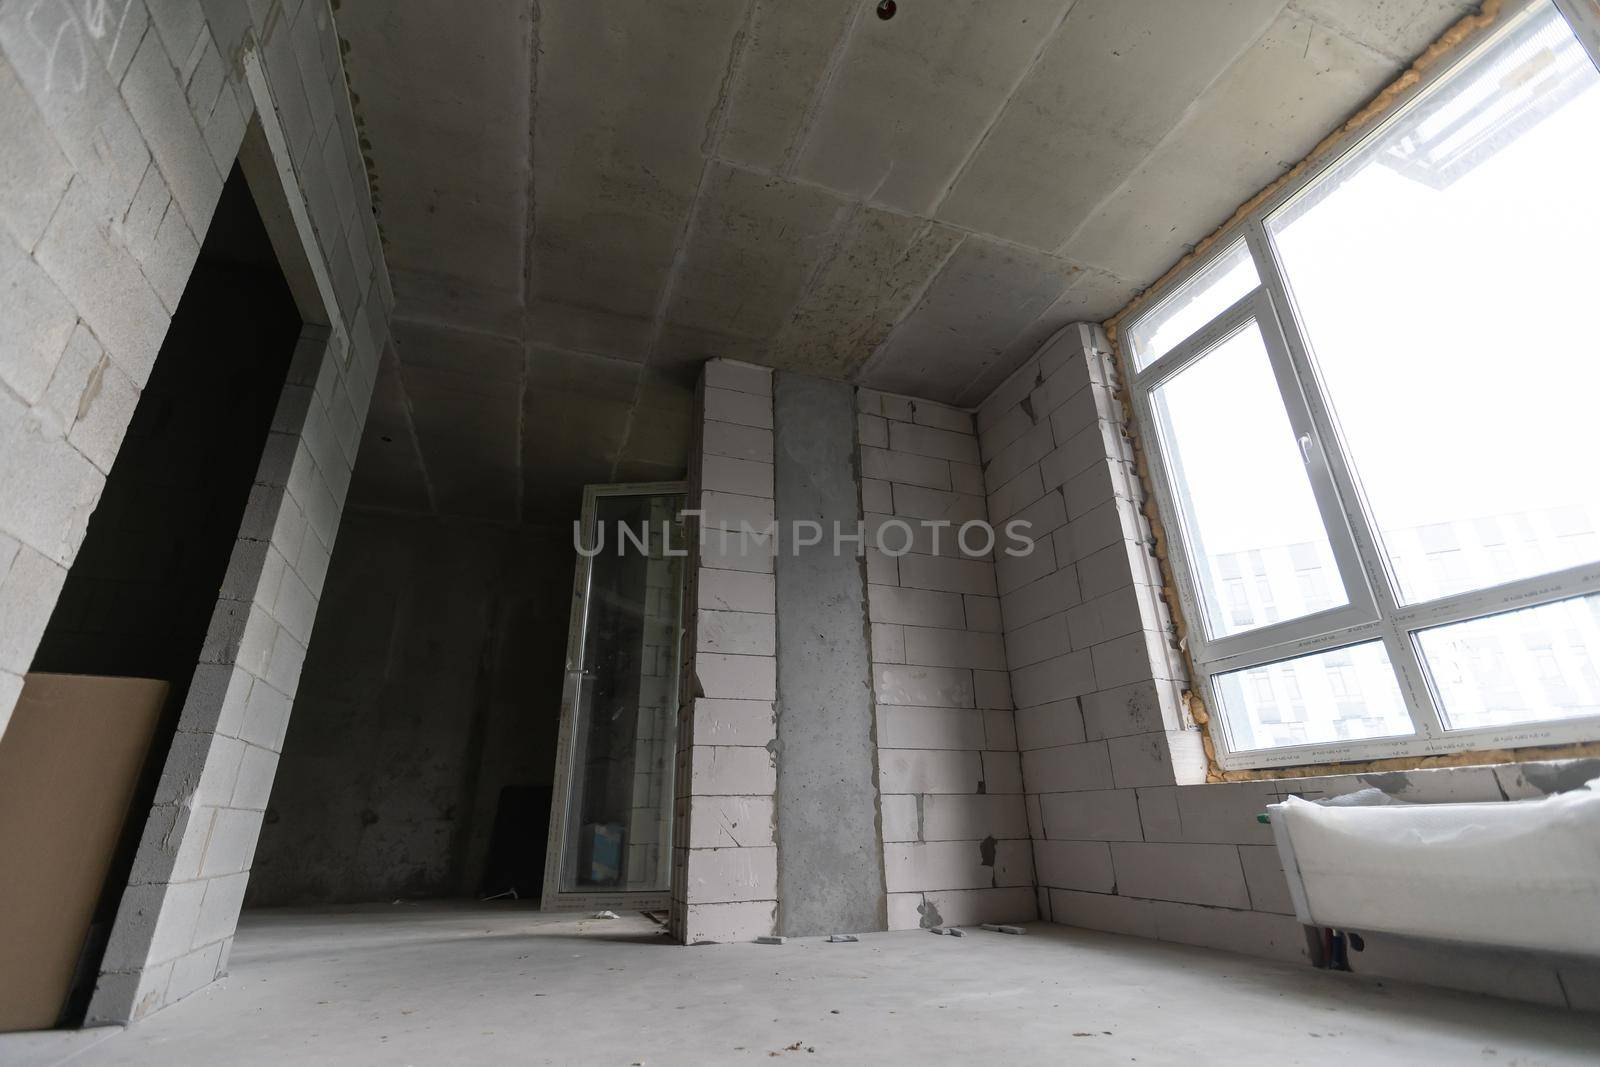 Small apartment without repair in a new building. A room in an unfinished house. Walls of foam block and concrete floor in a tiny apartment.